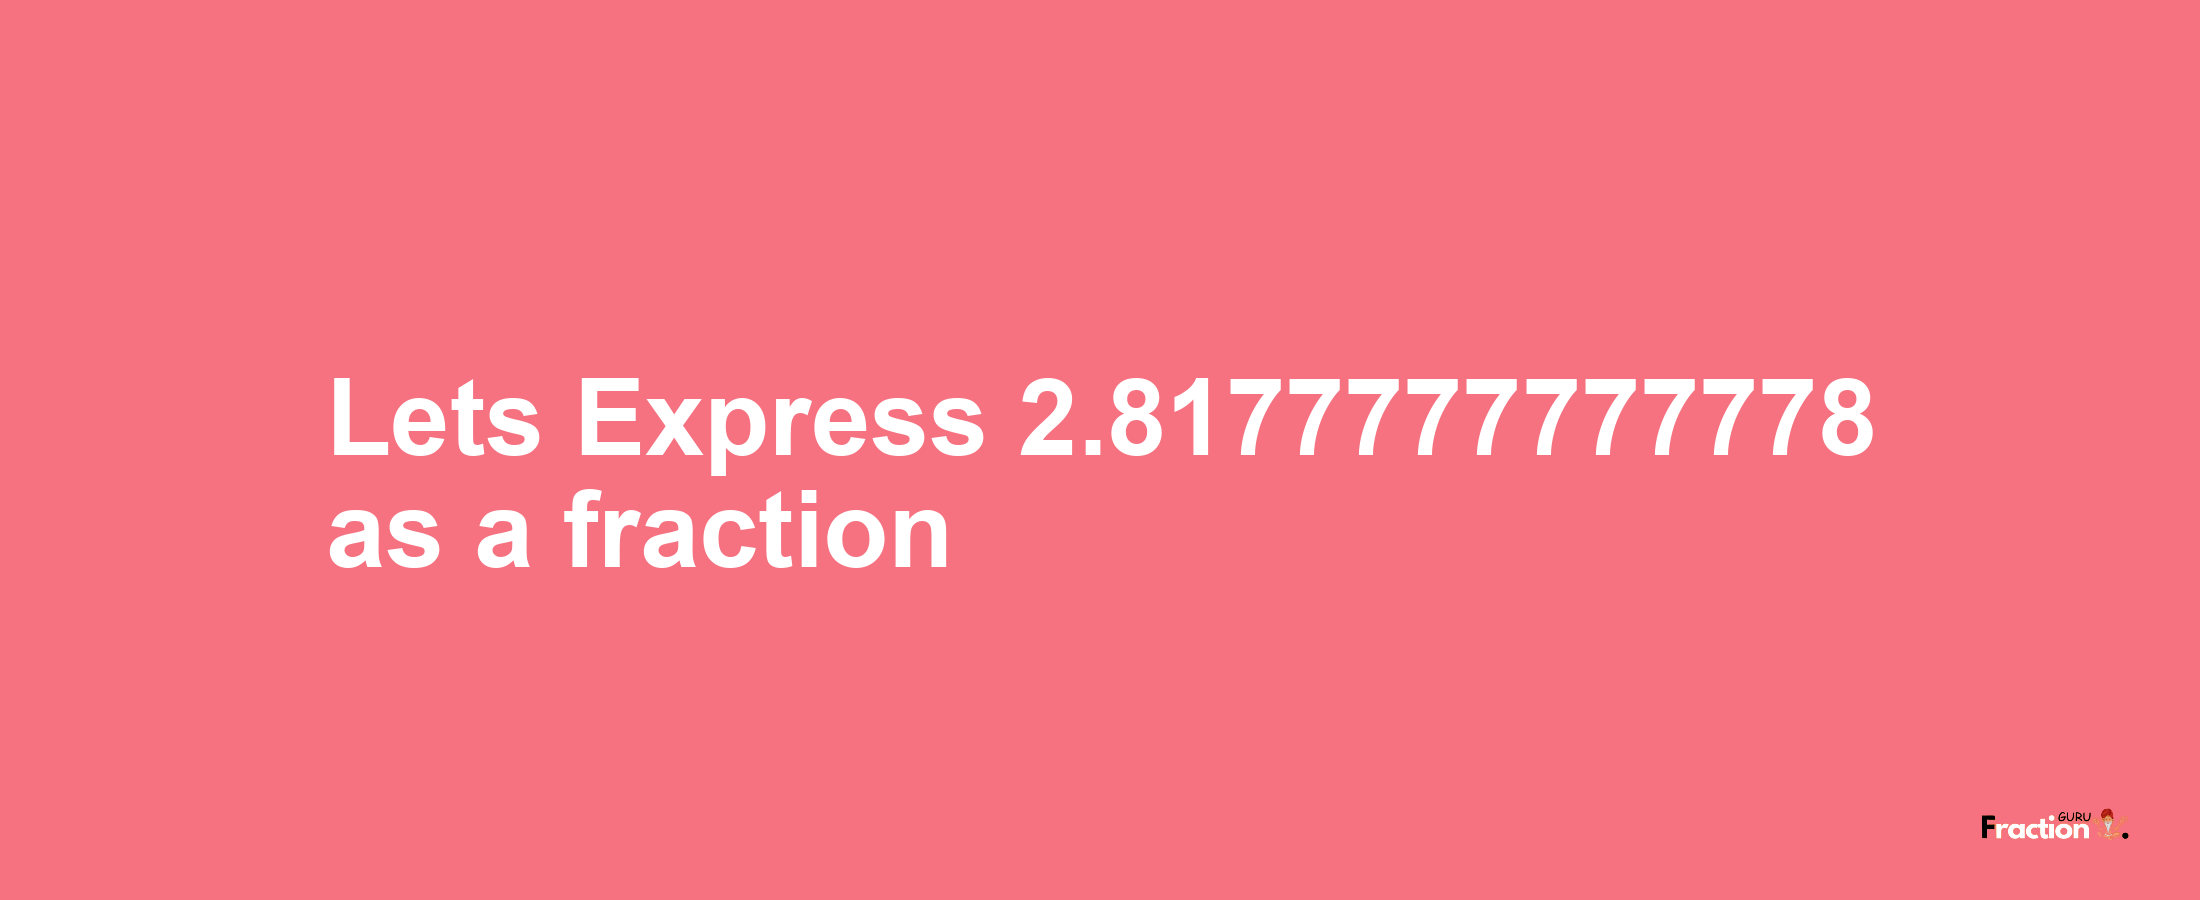 Lets Express 2.8177777777778 as afraction